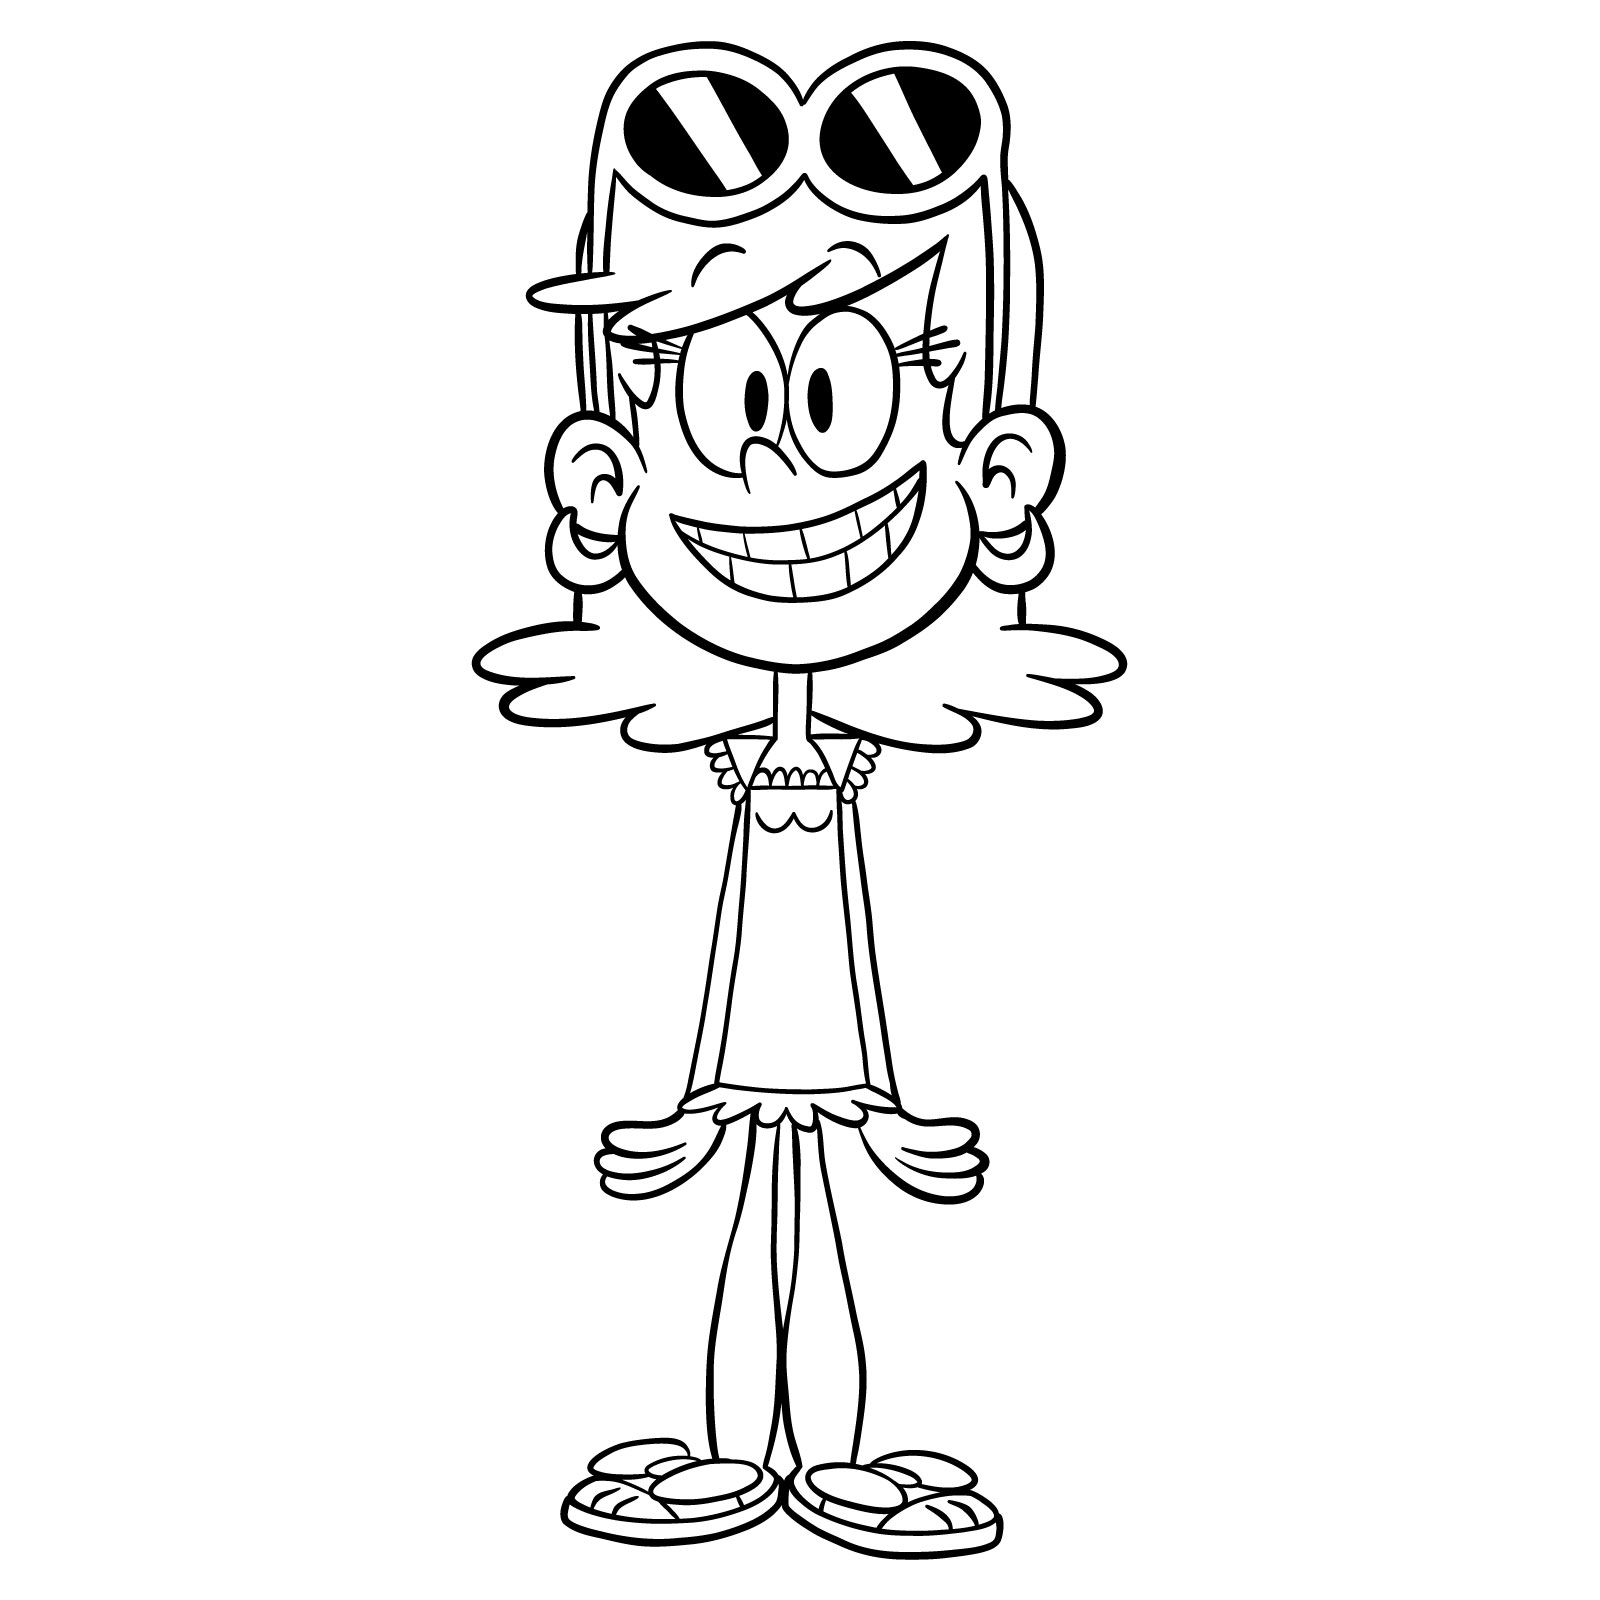 How to draw smiling Leni Loud - final step